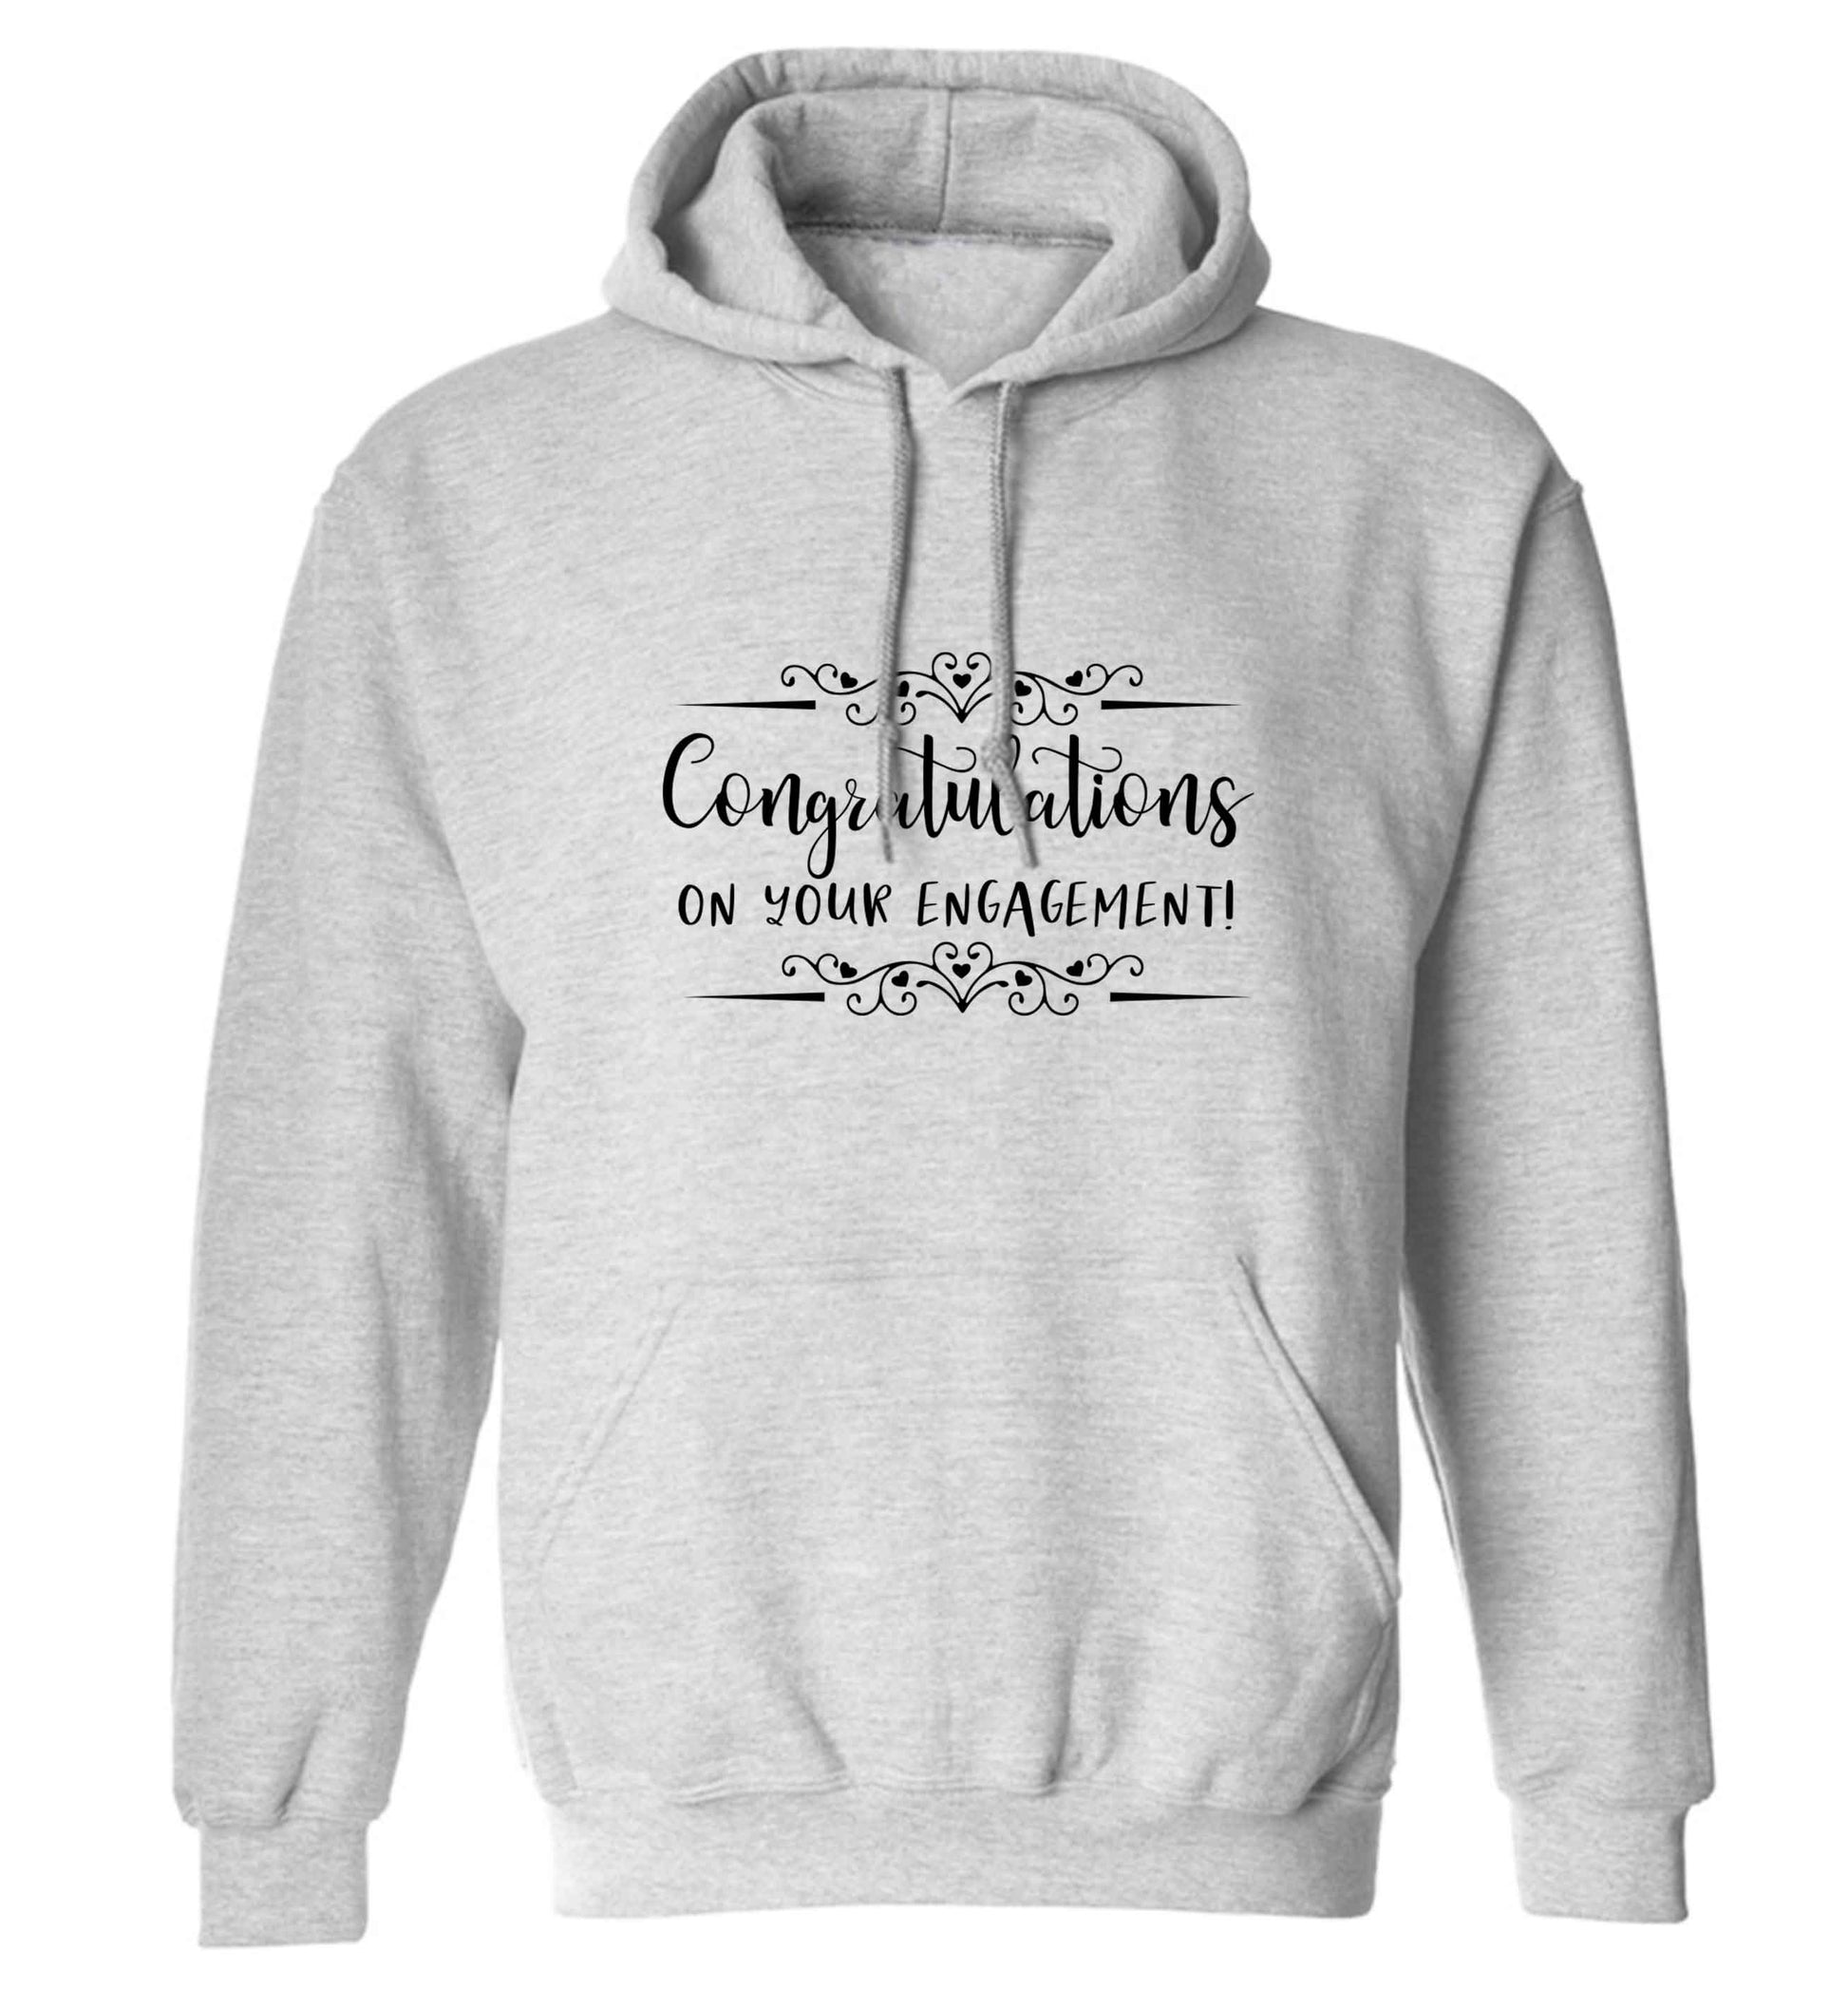 Congratulations on your engagement adults unisex grey hoodie 2XL